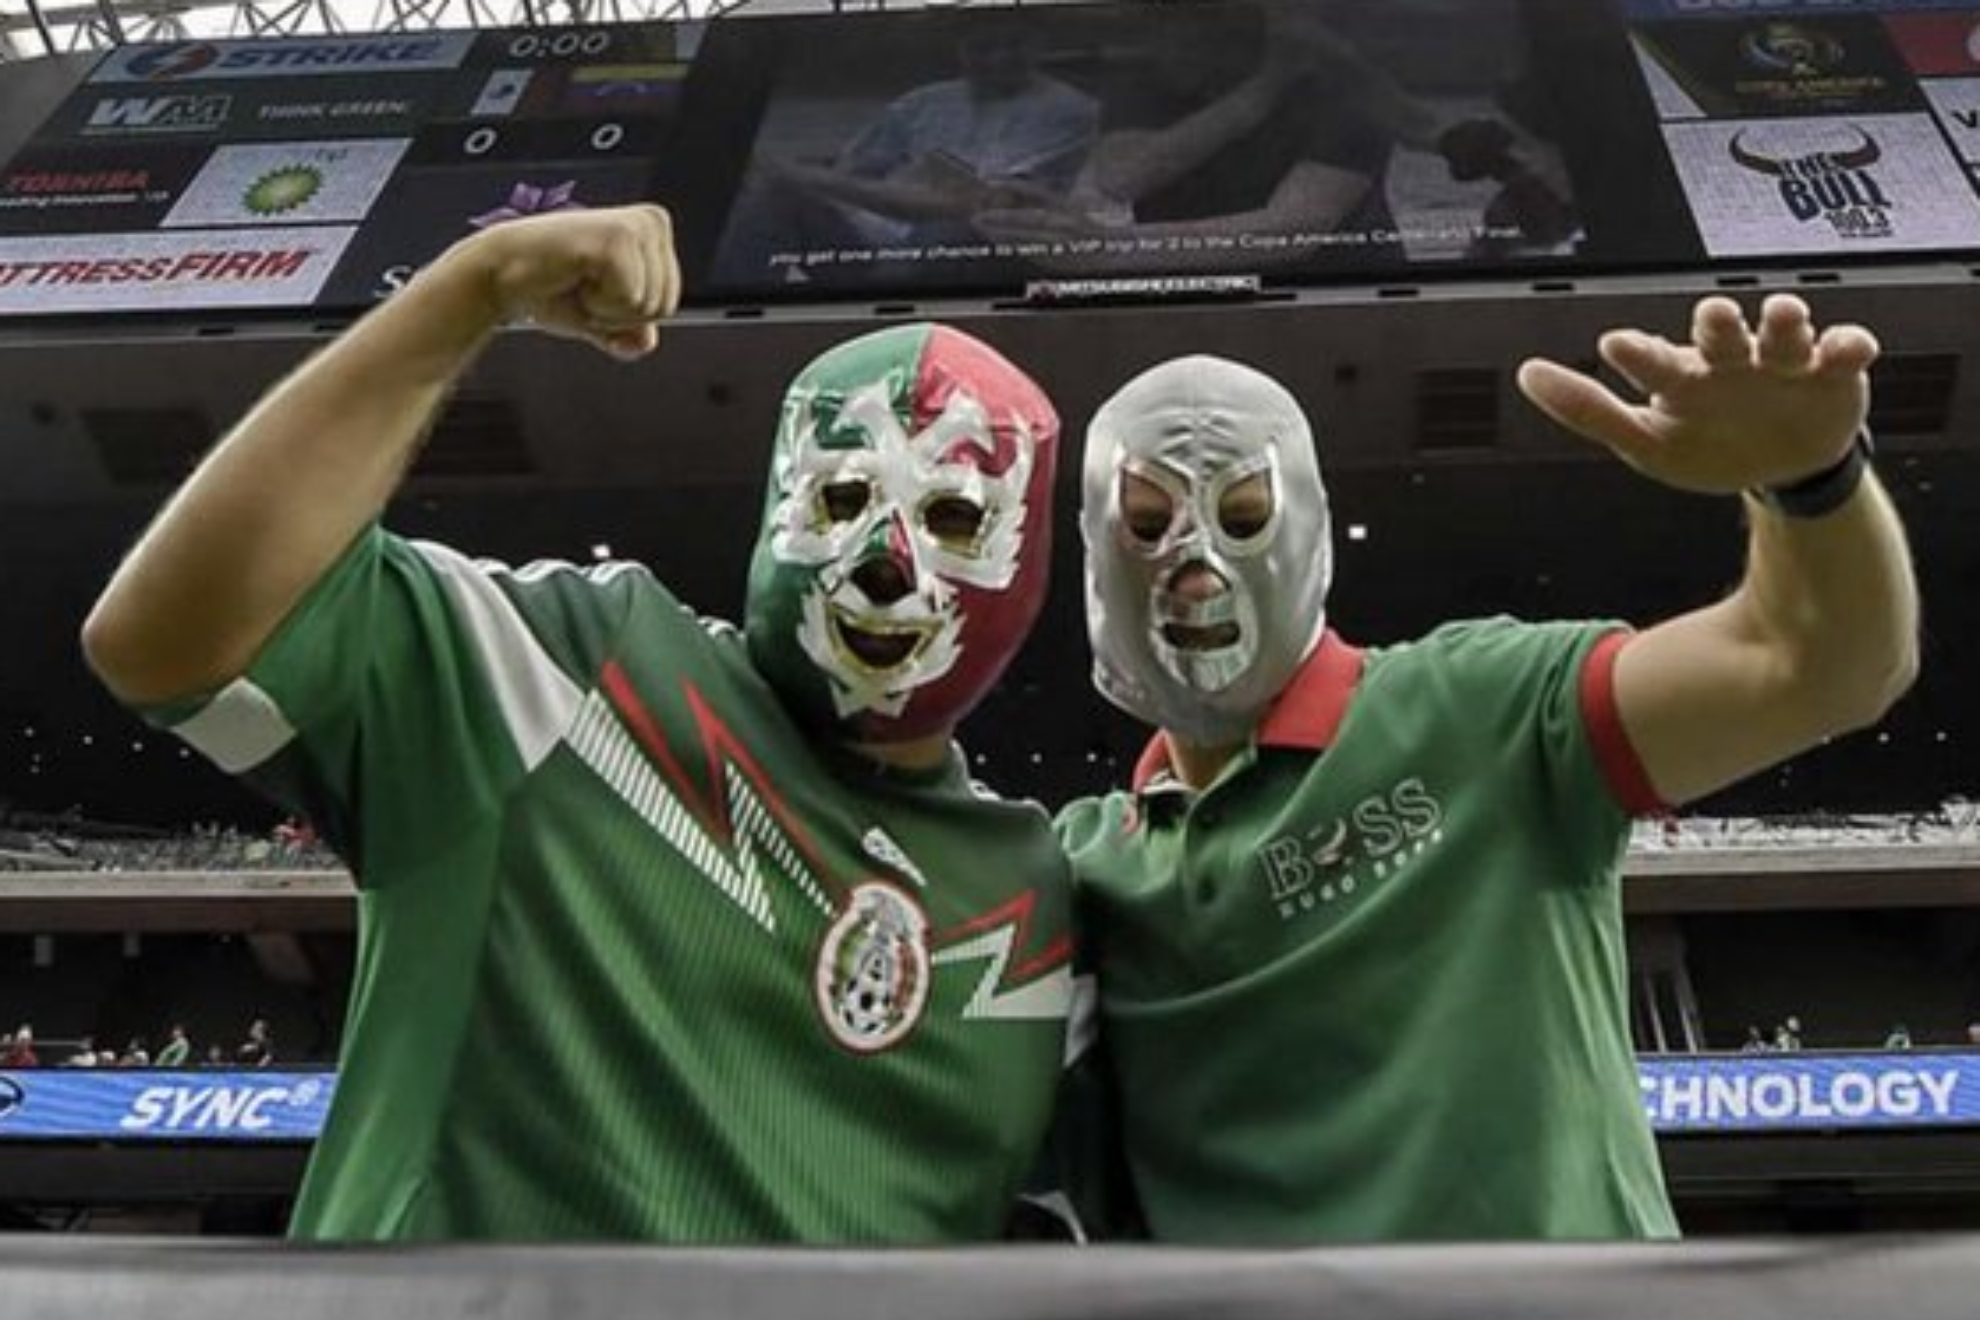 Mexican fans with Lucha Libre Mask/Twitter @elpalco_sv